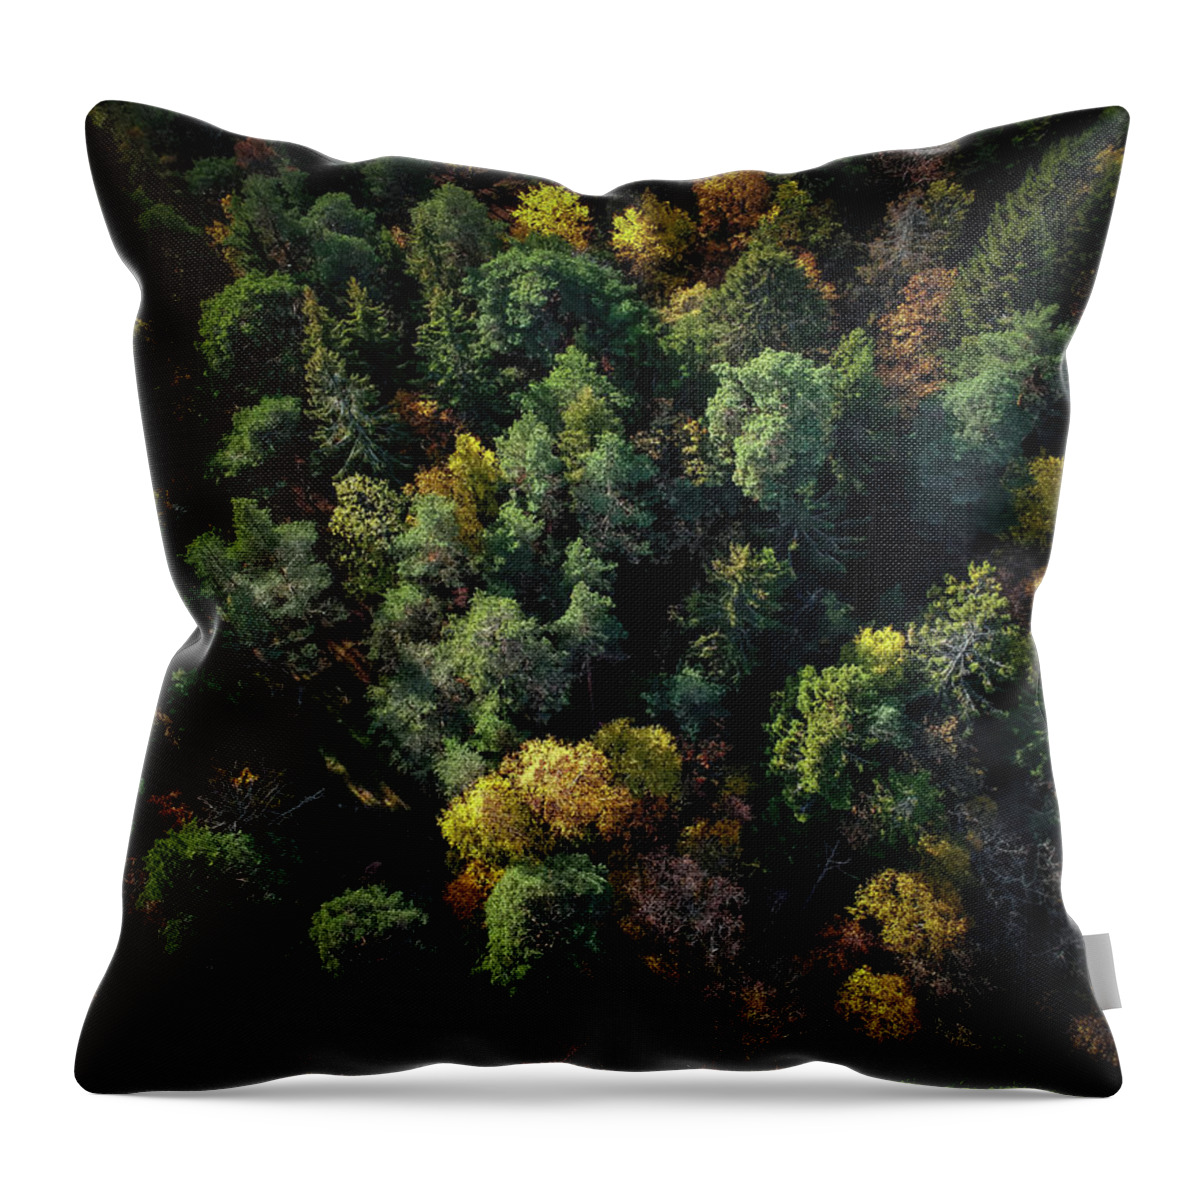 Drone Throw Pillow featuring the photograph Forest Landscape - Aerial Photography by Nicklas Gustafsson